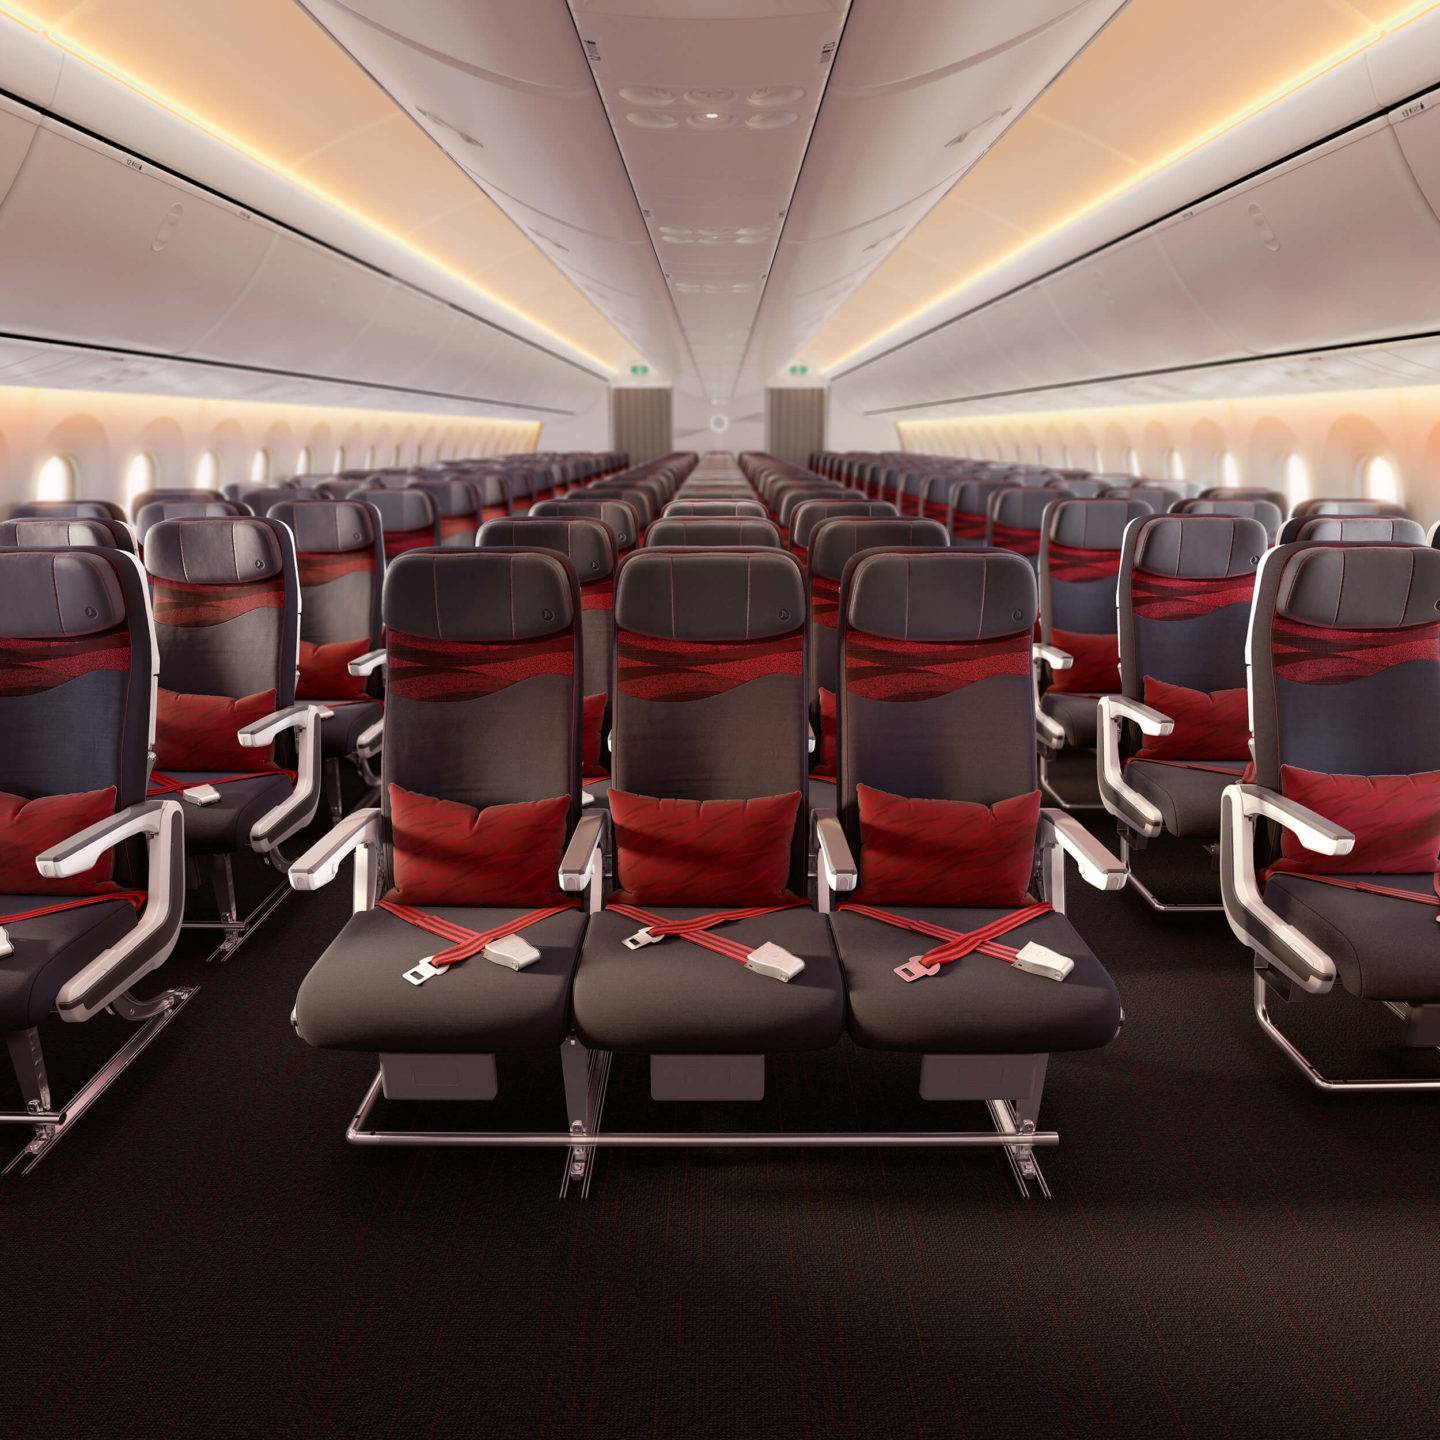 Overview of a vast economy class cabin on the Turkish Airlines Boing 787 Dreamliner